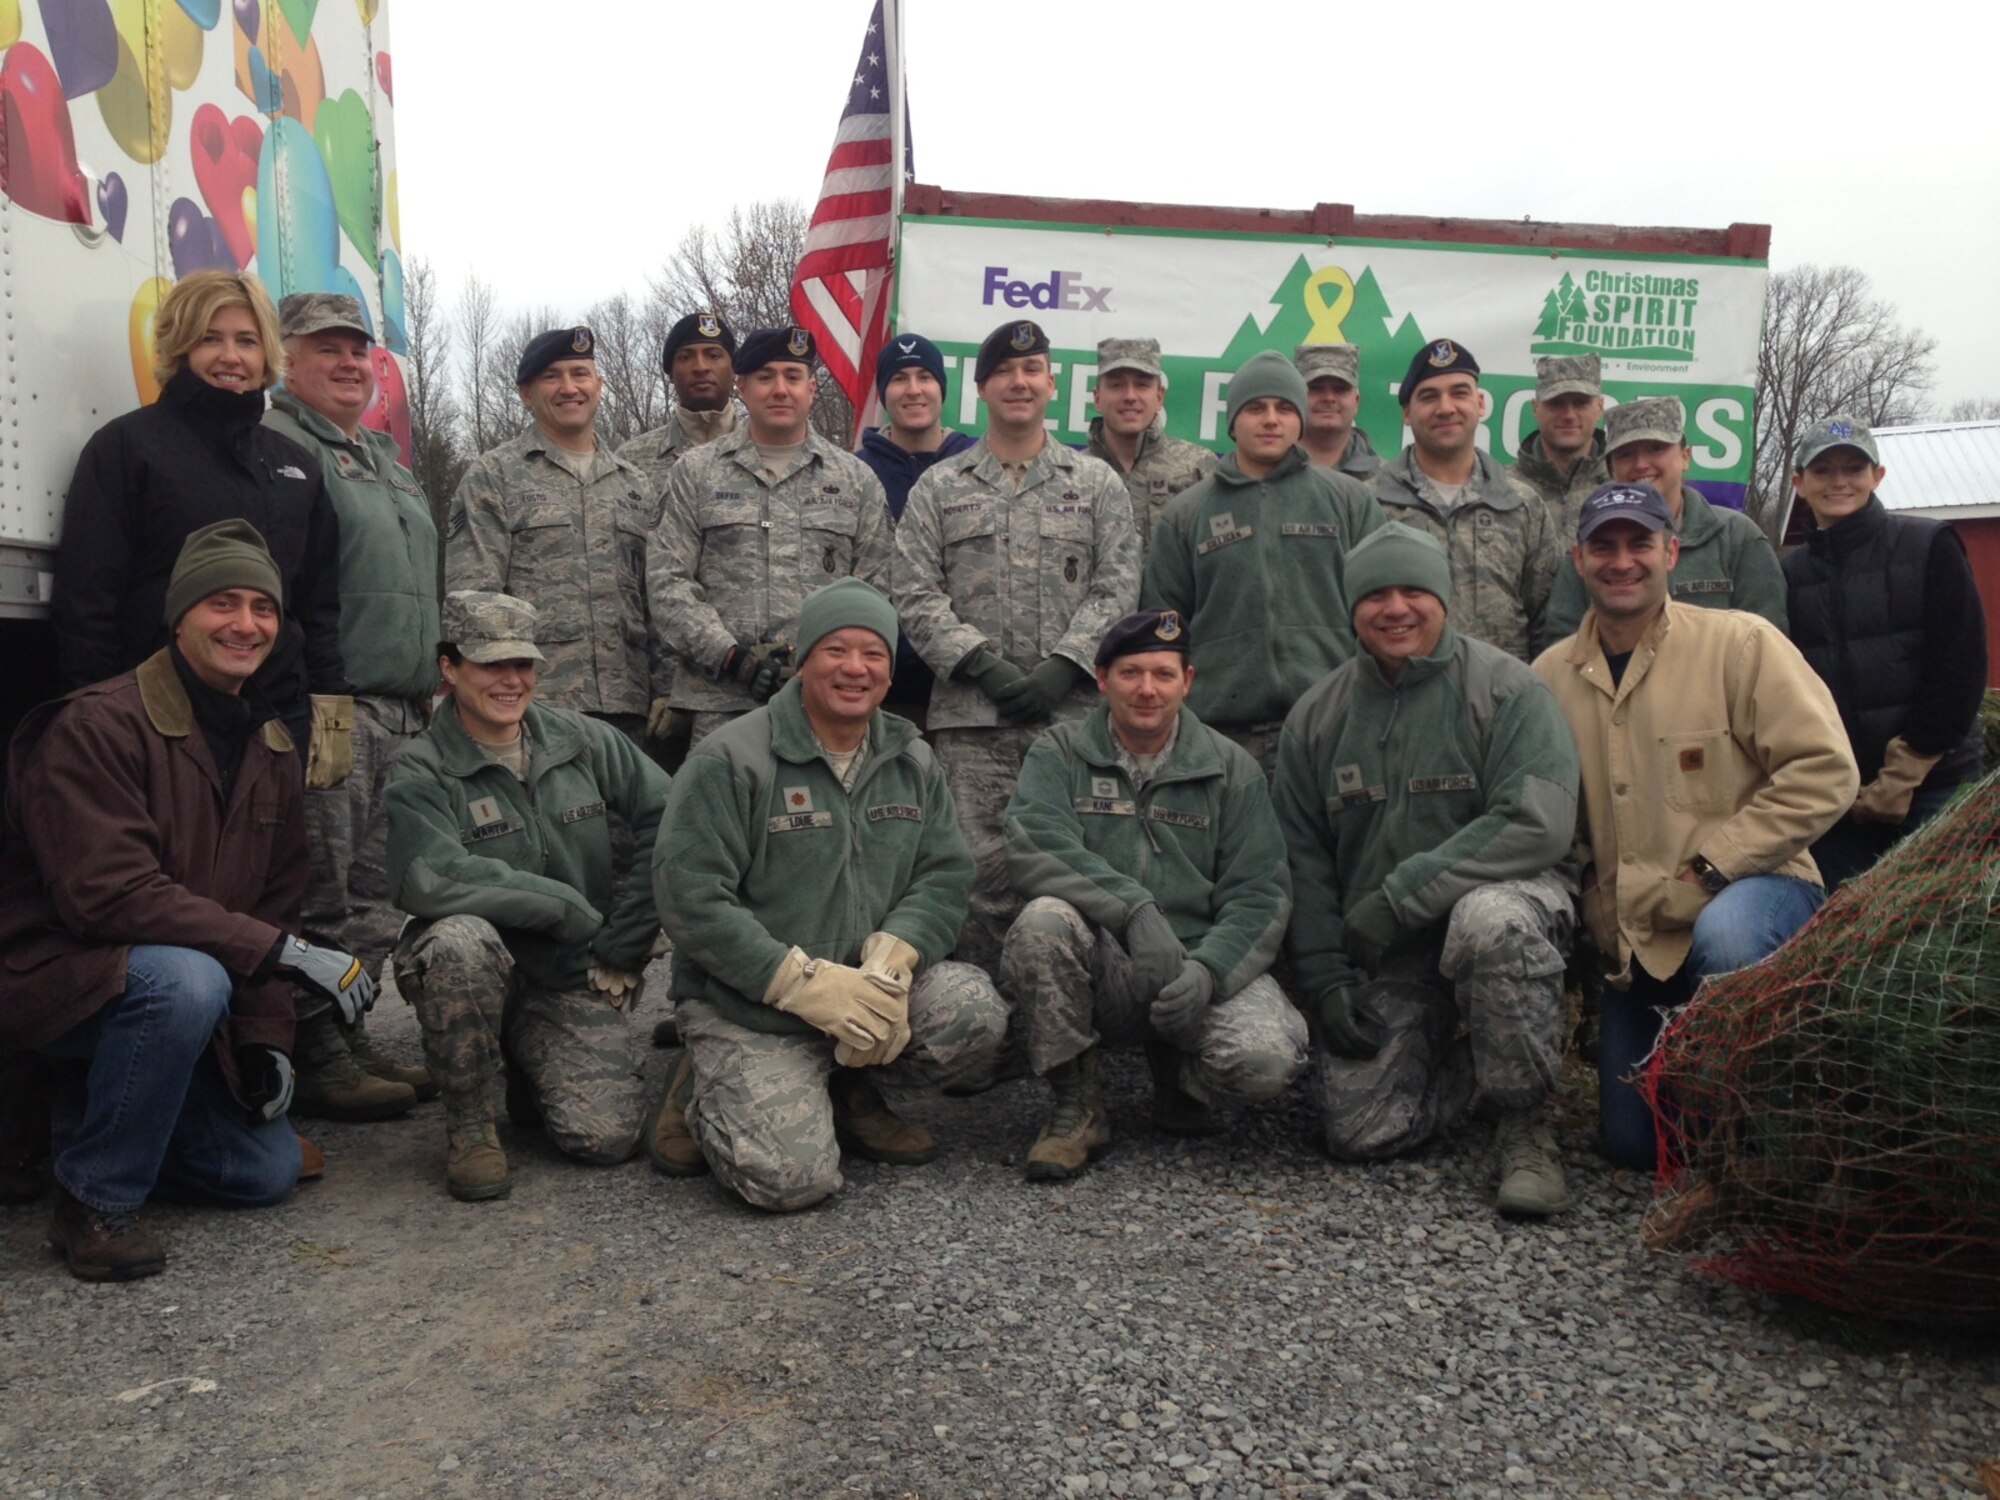 BALLSTON SPA, N.Y. -- New York Air National Guard members of the 109th Airlift Wing from Scotia, N.Y. volunteered their time to assist FedEx driver Don Pelletier load Christmas Trees here at Ellms Christmas Tree Farm Dec. 7. Nineteen Airmen volunteered to assist in the annual "Trees for Troops" loading of about 150 donated trees bound for military installations and families around the country and the globe. Courtesy photo by Chip Ellms, Ellms Christmas Tree Farm. (RELEASED)